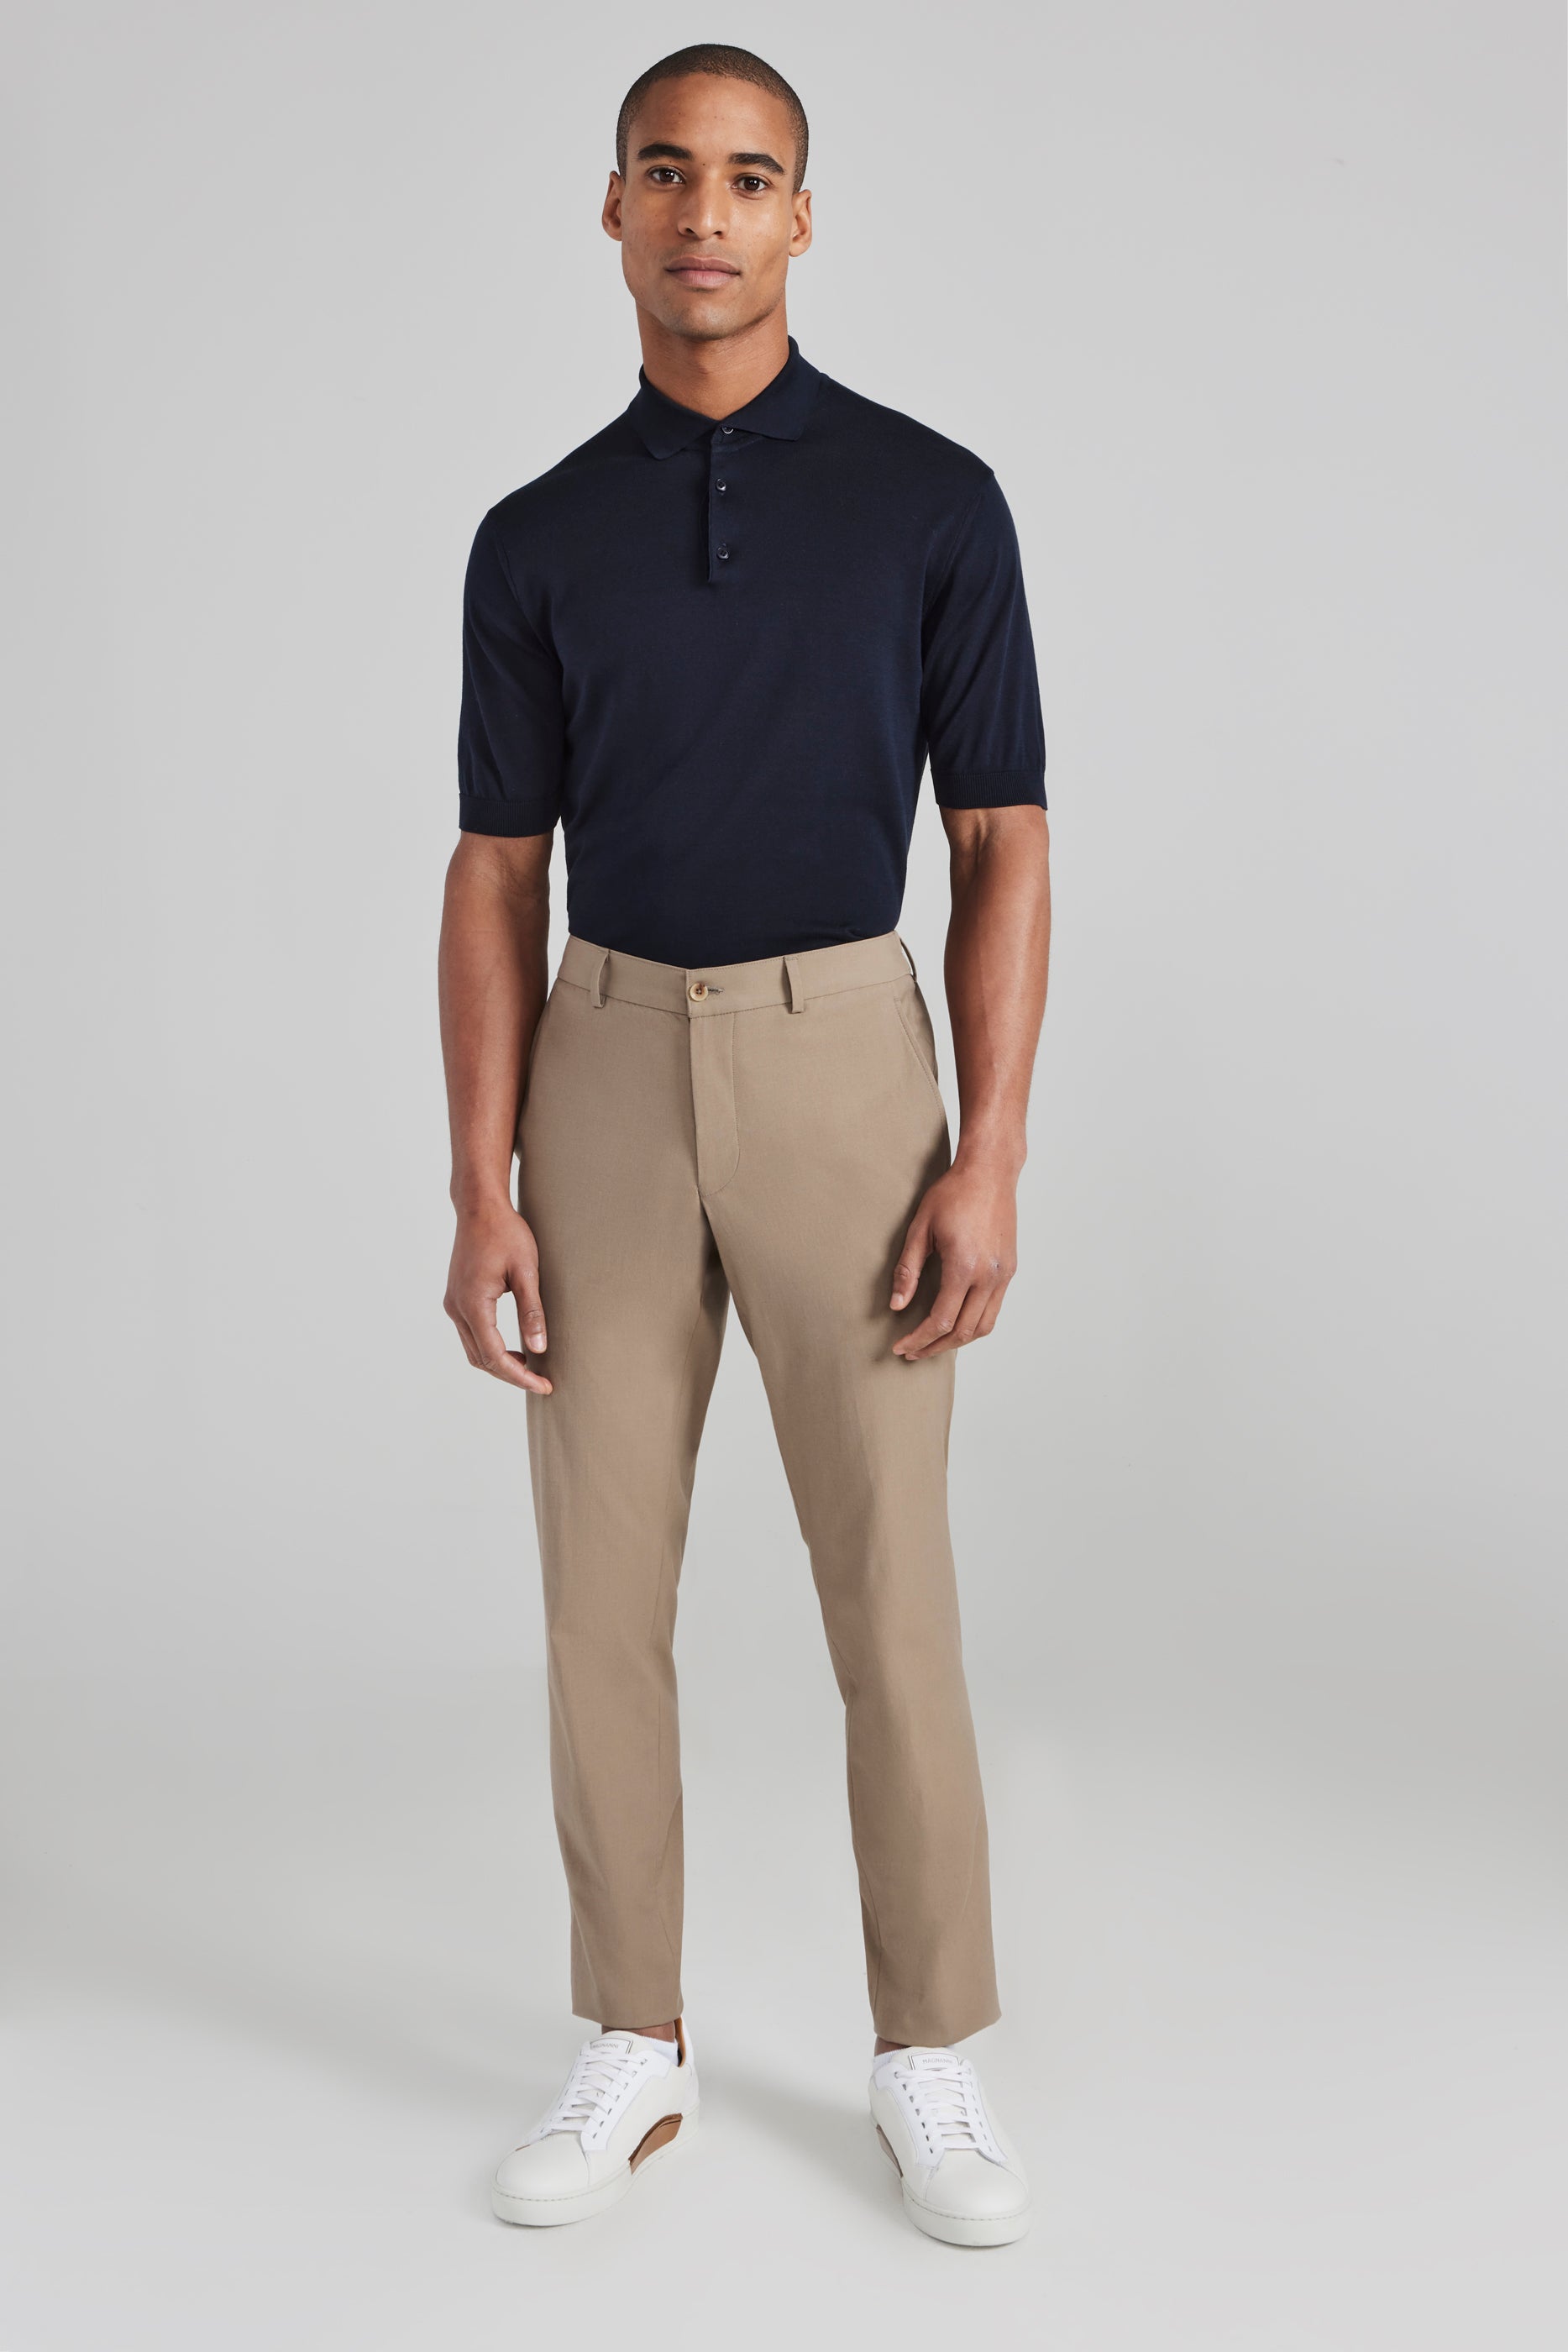 Alt view 2 Perth Wool and Cotton Stretch Pant in Camel